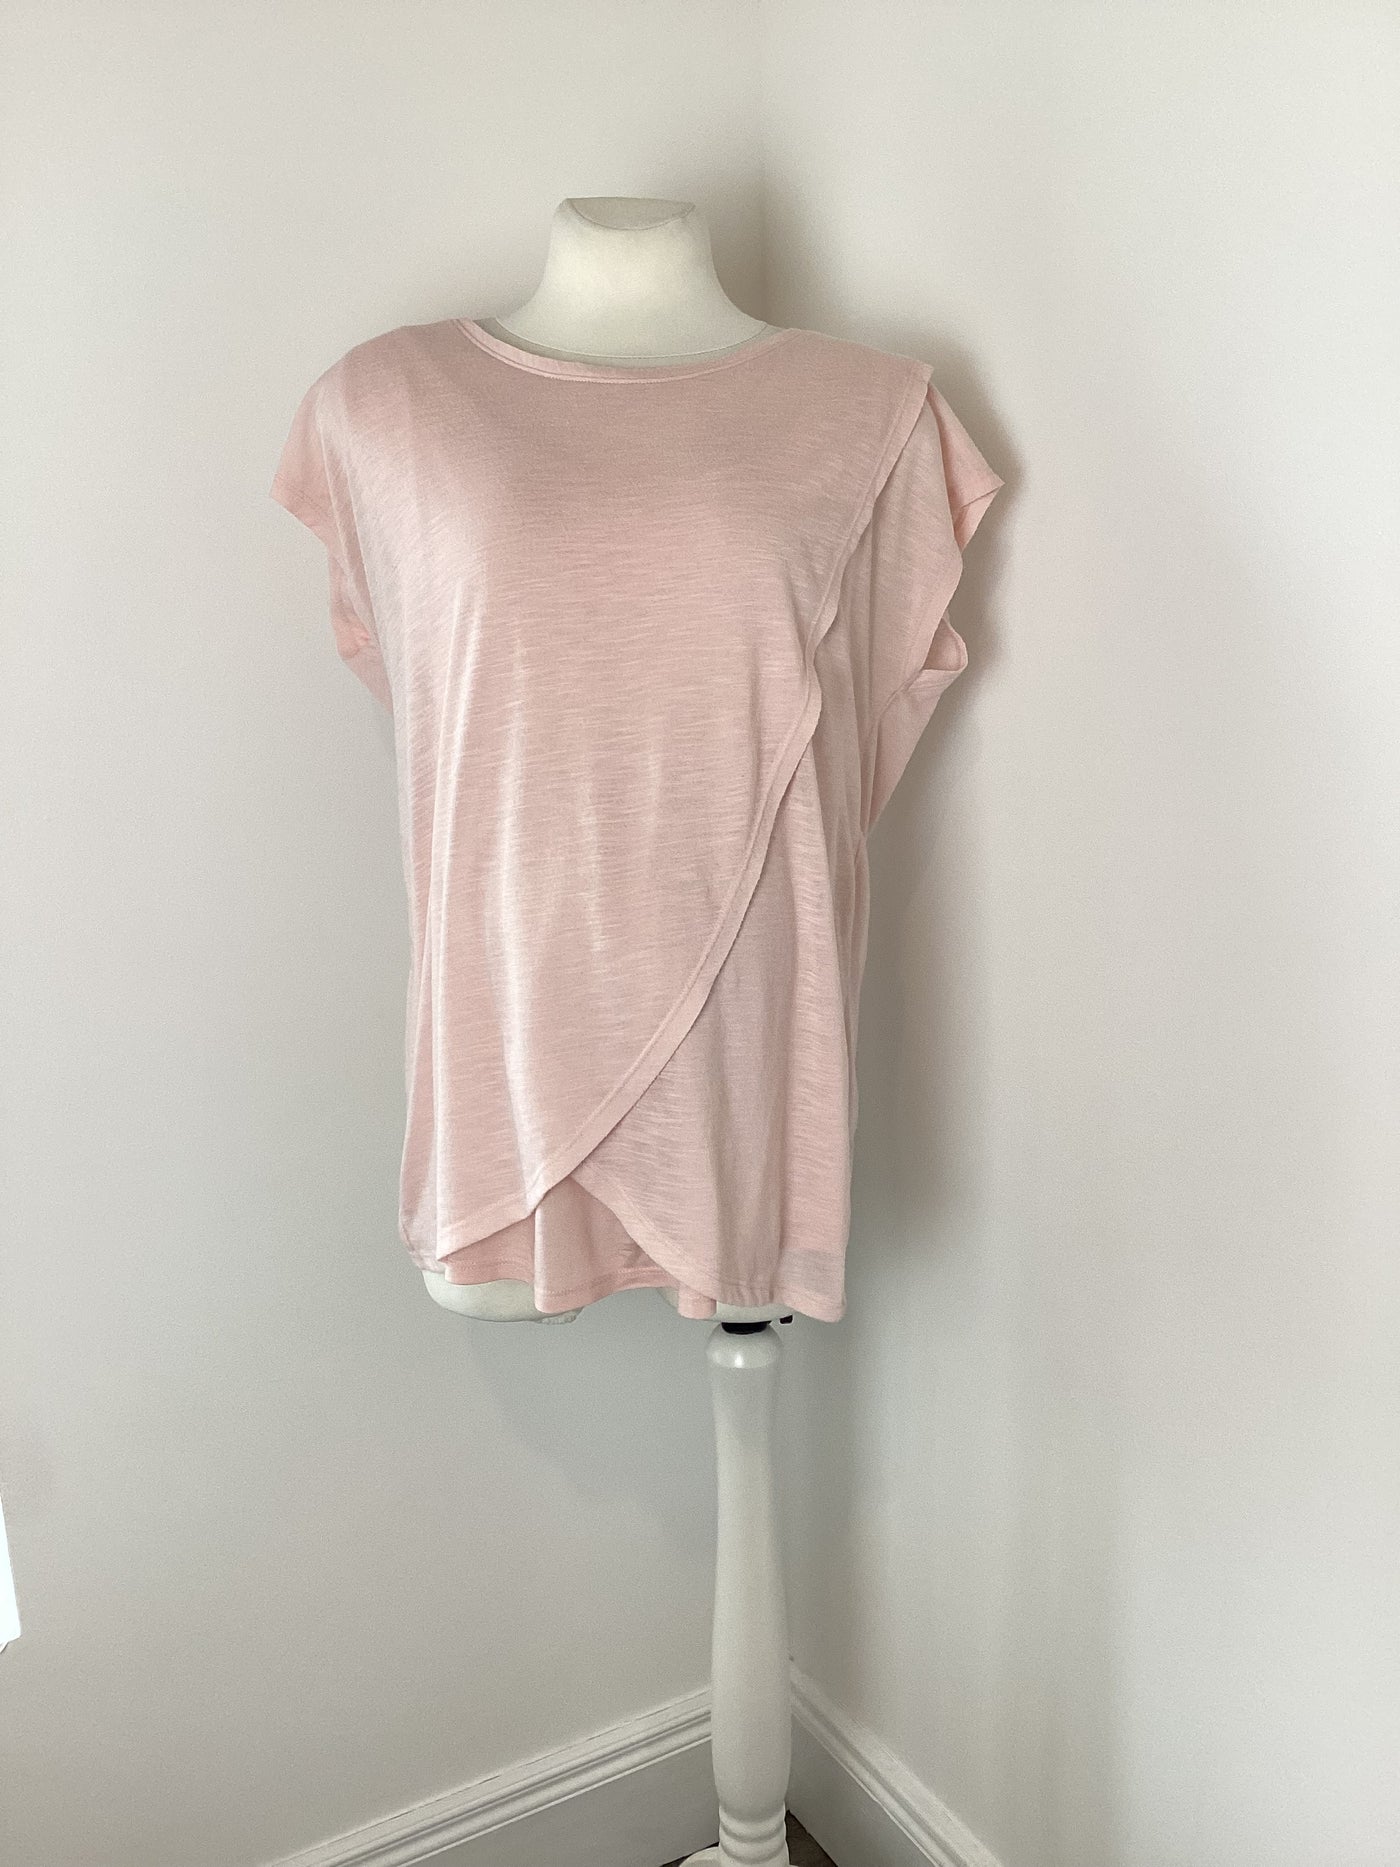 New Look Maternity light pink layered nursing top - Size 16